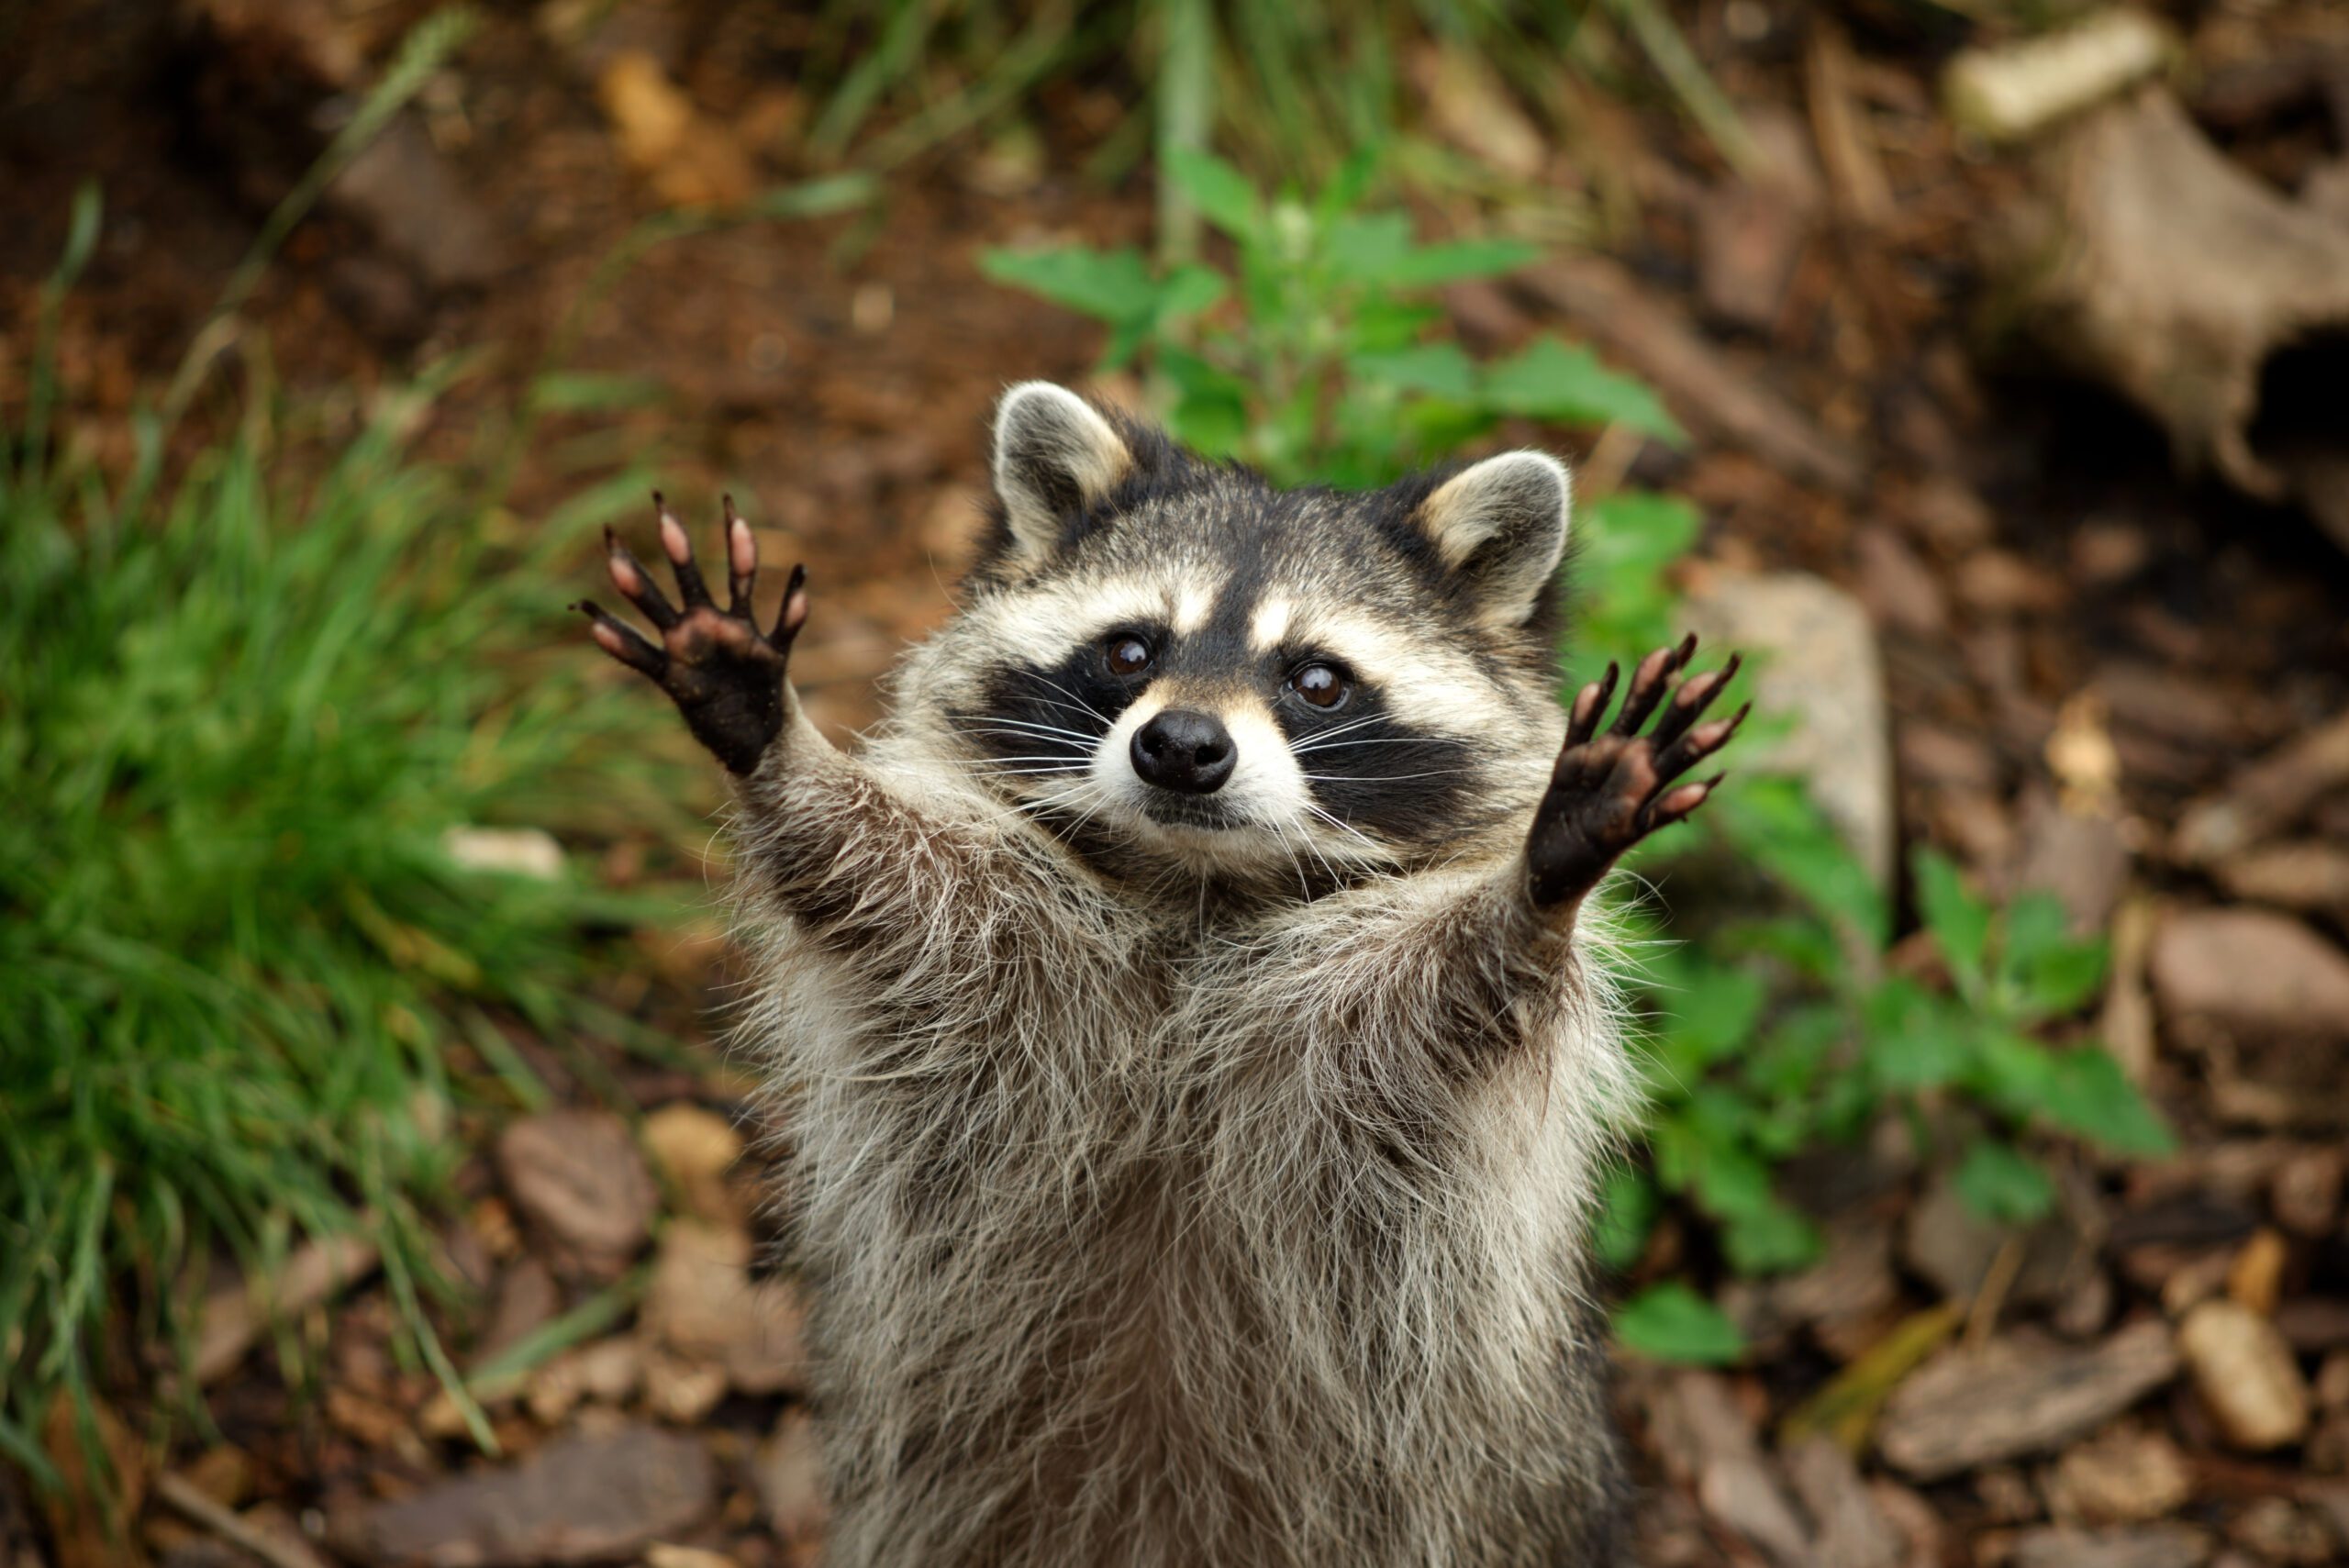 Raccoon opens arms while standing in grass.